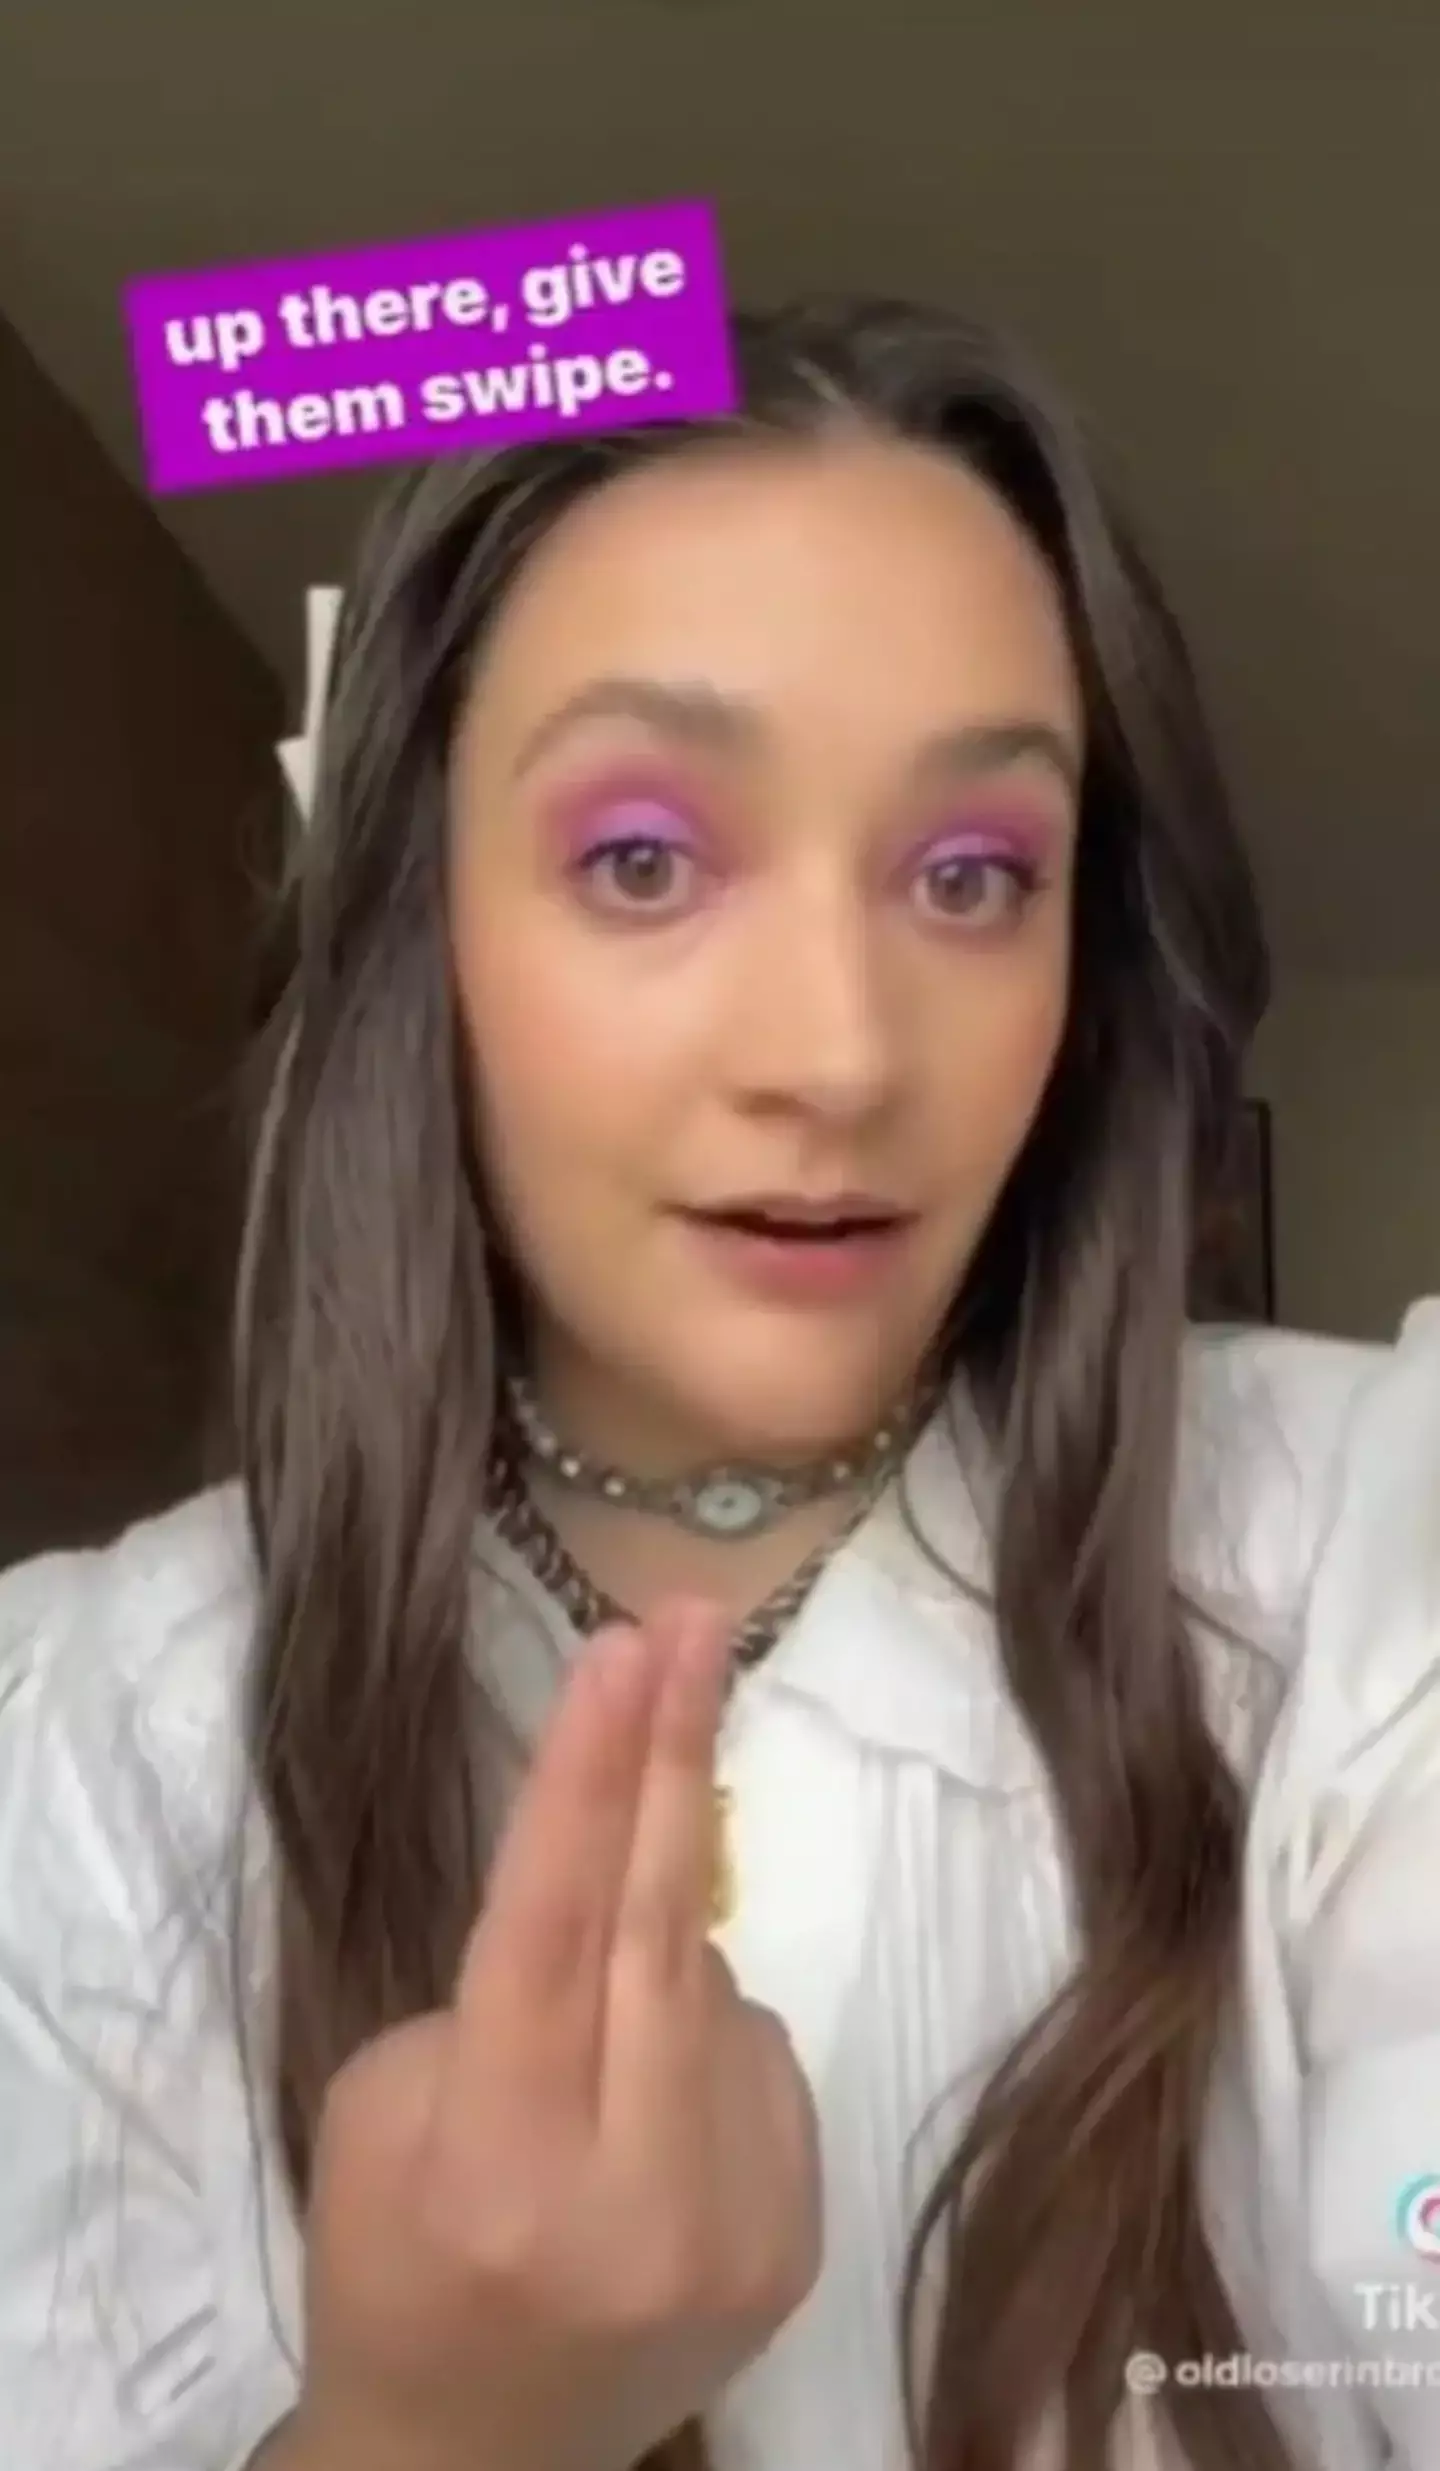 TikTok users are sharing vabbing techniques.